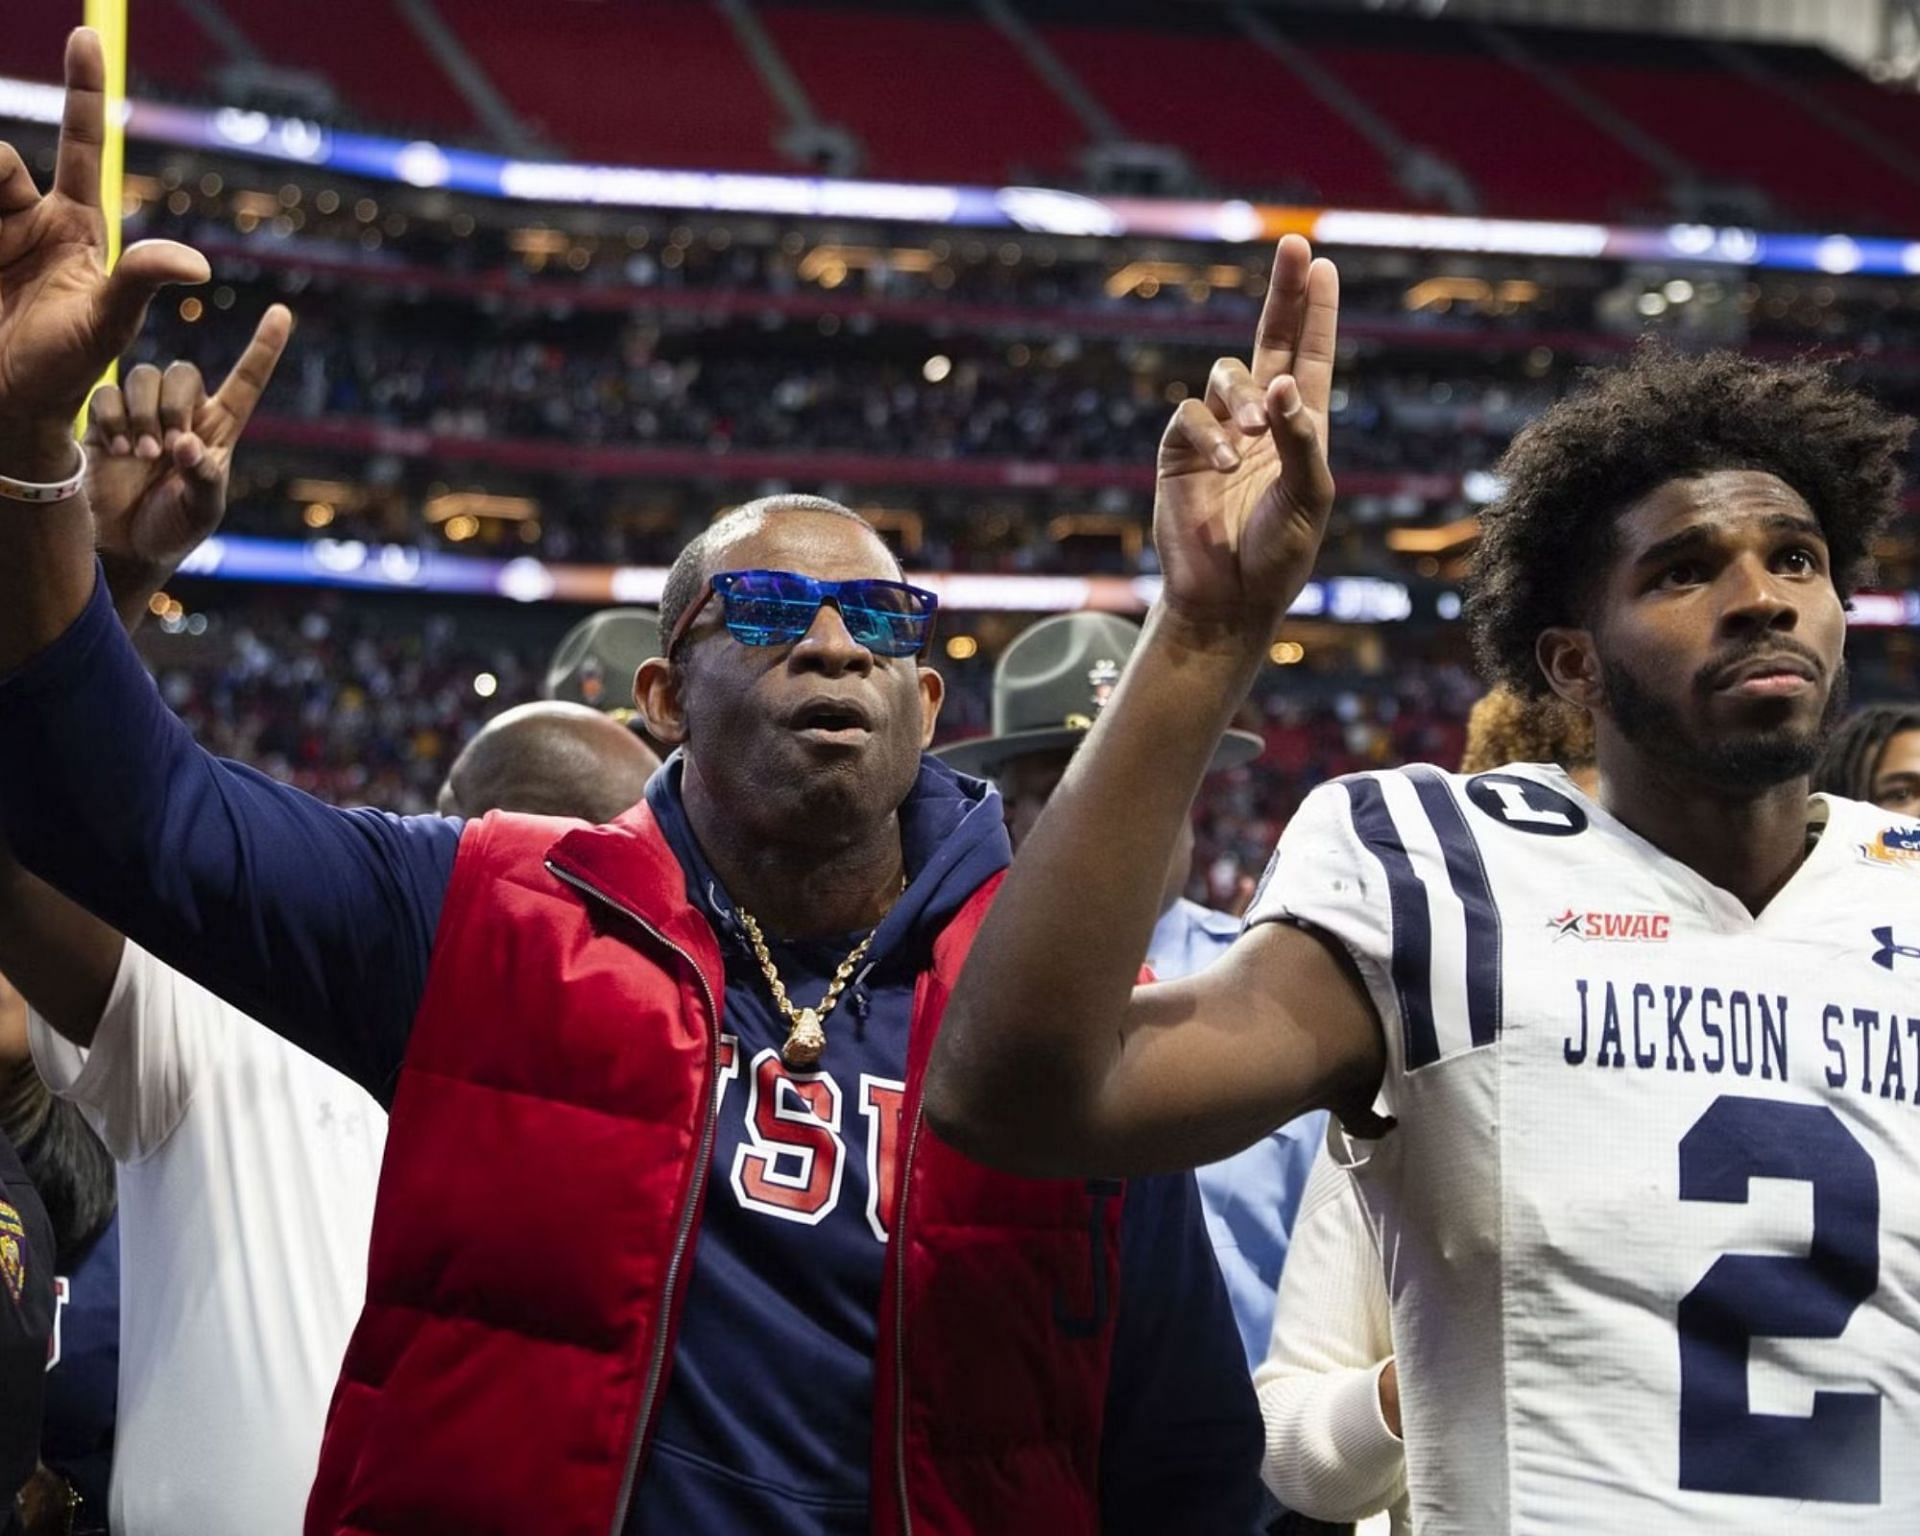 Deion Sanders and his son Shedeur Sanders after a Jackson State game